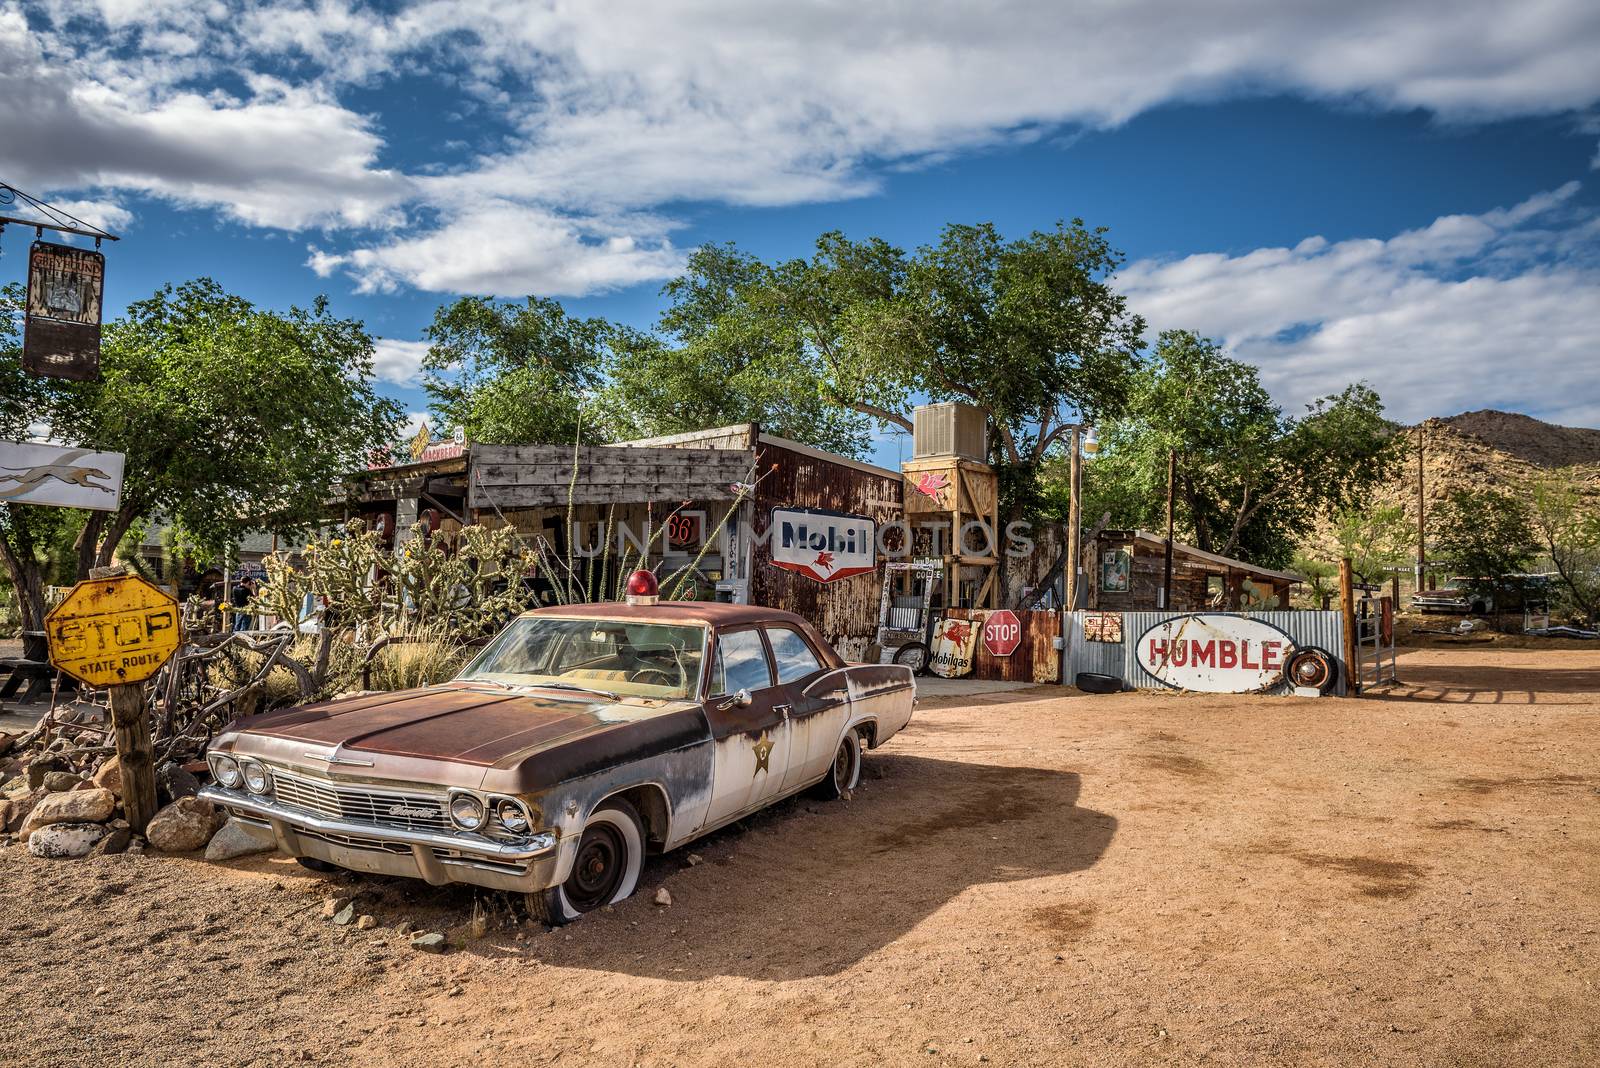 Old sheriff's car with a Siren in Hackberry, Arizona by nickfox